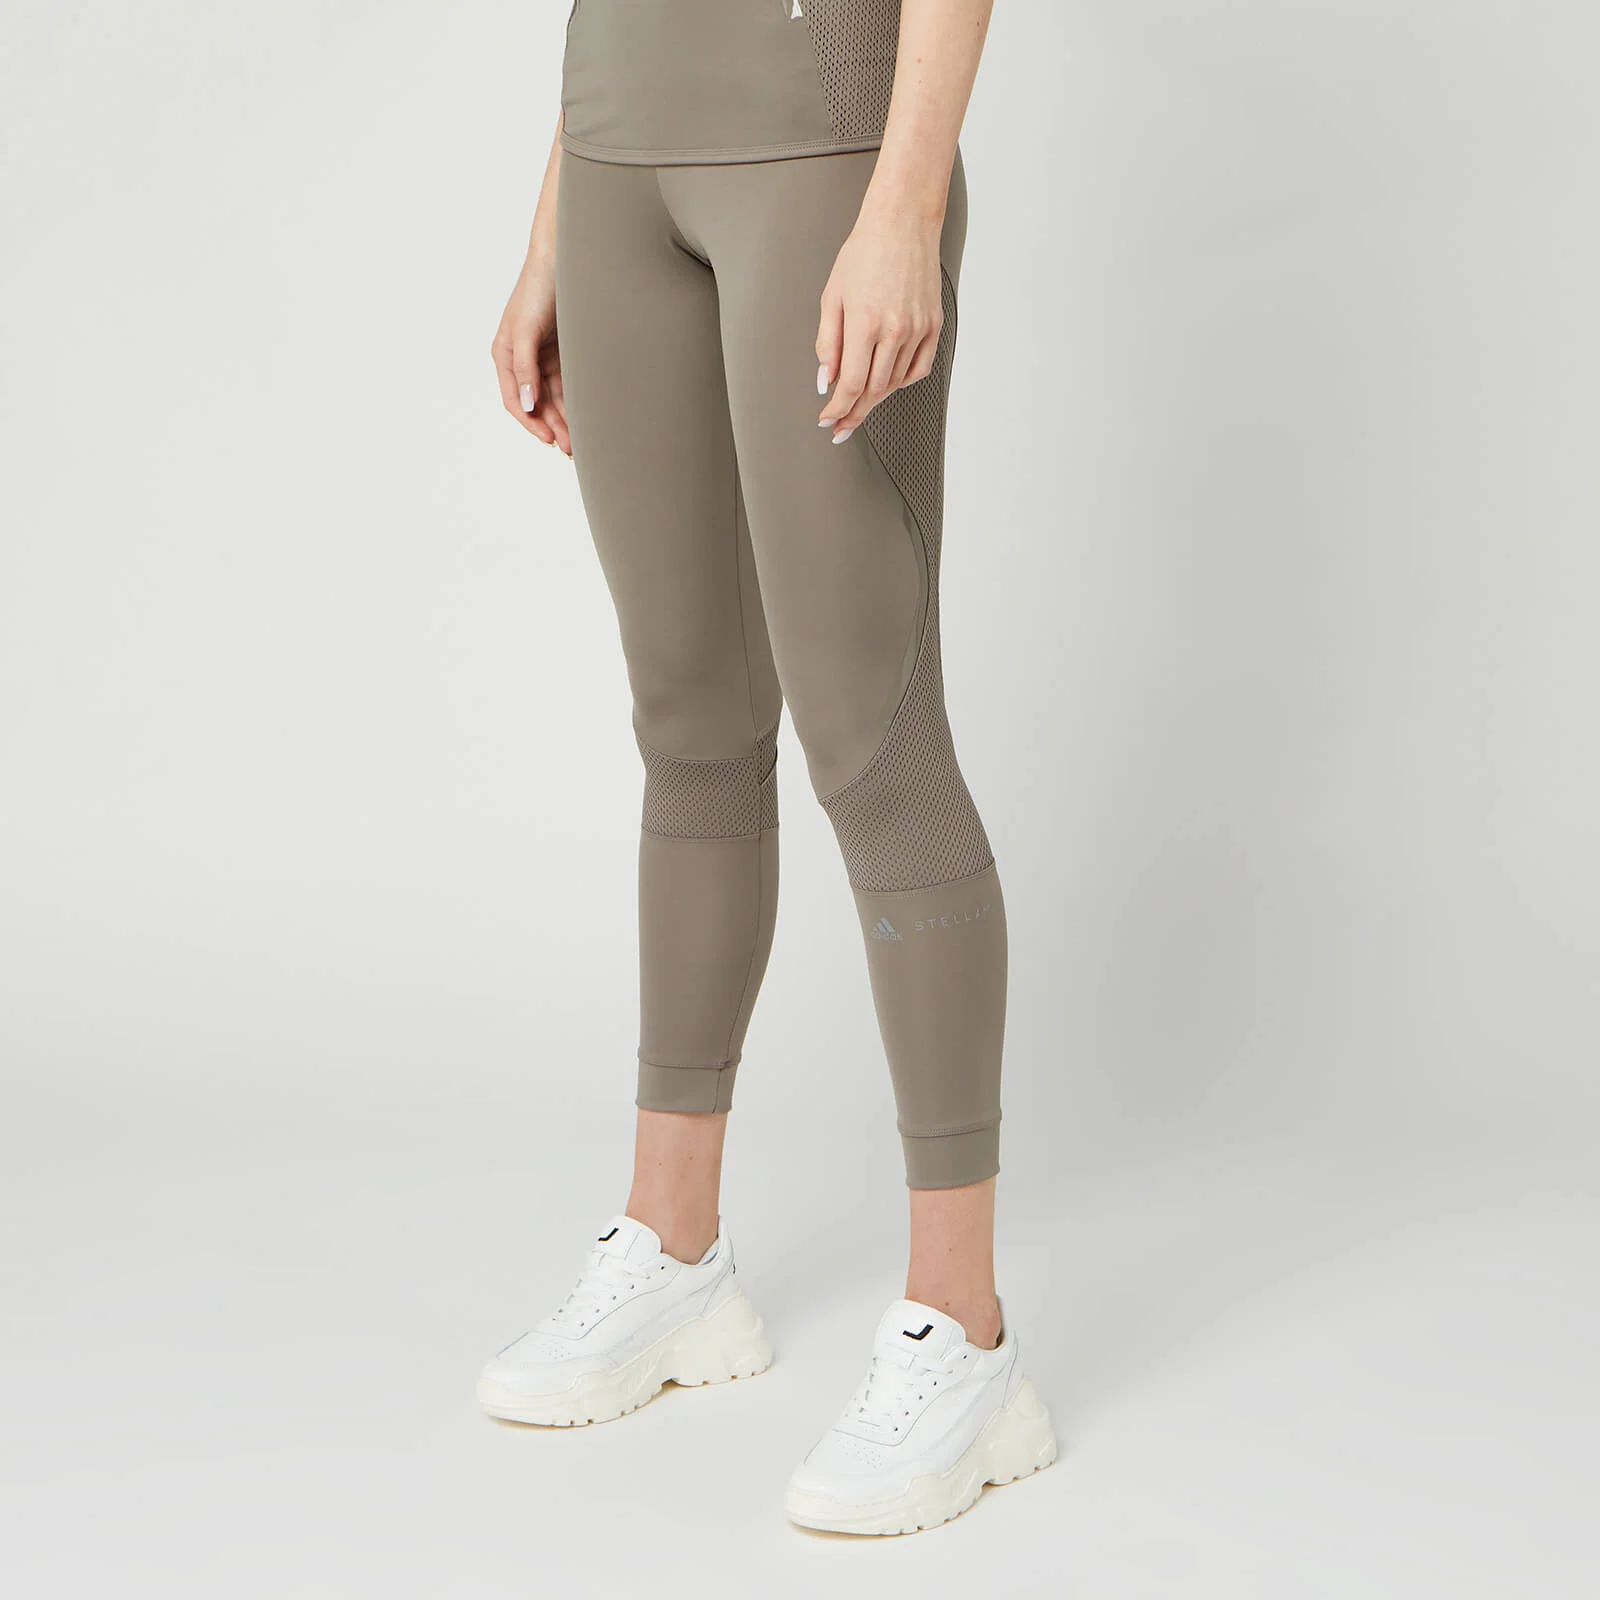 adidas by Stella McCartney Women's Essential Tights - Brown Image 1